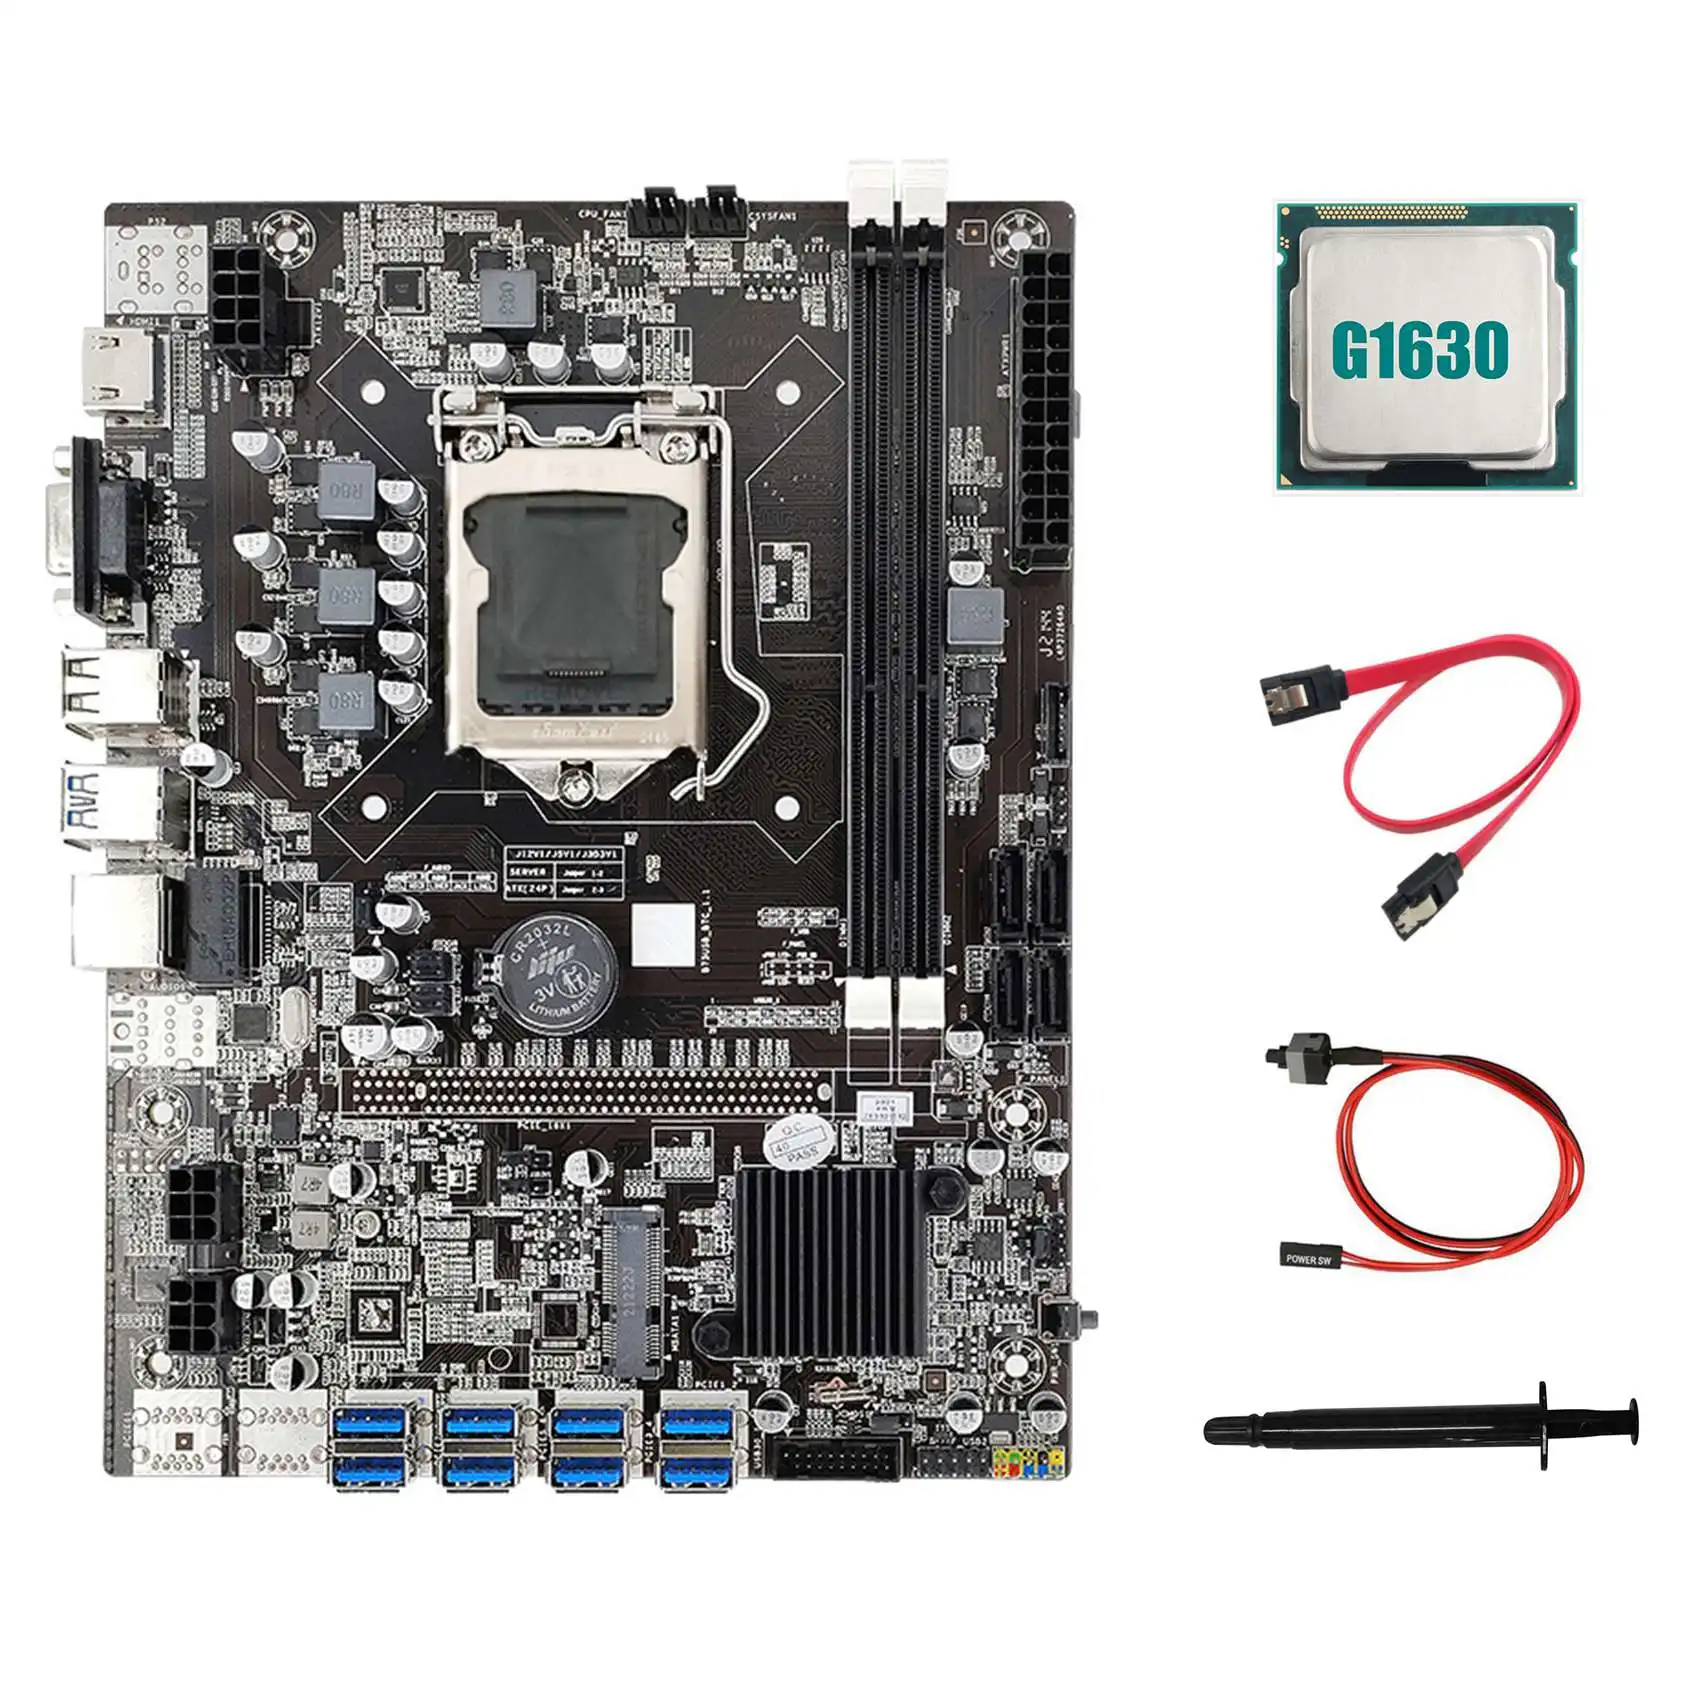 

B75 ETH Mining Motherboard 8XPCIE to USB+G1630 CPU+Thermal Grease+SATA Cable+Switch Cable LGA1155 Miner Motherboard